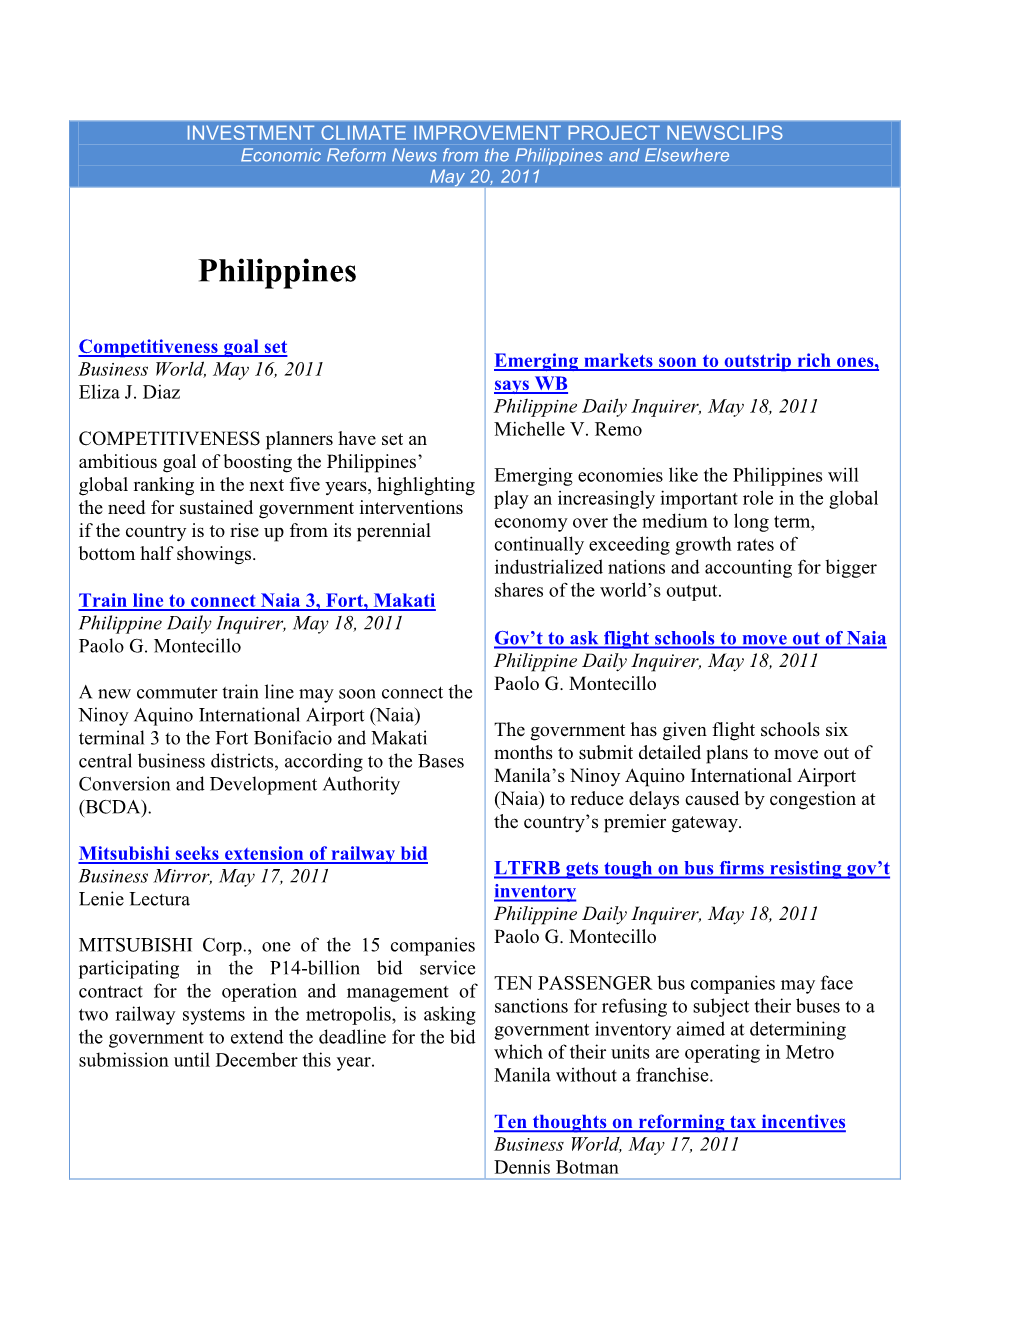 Philippines and Elsewhere May 20, 2011